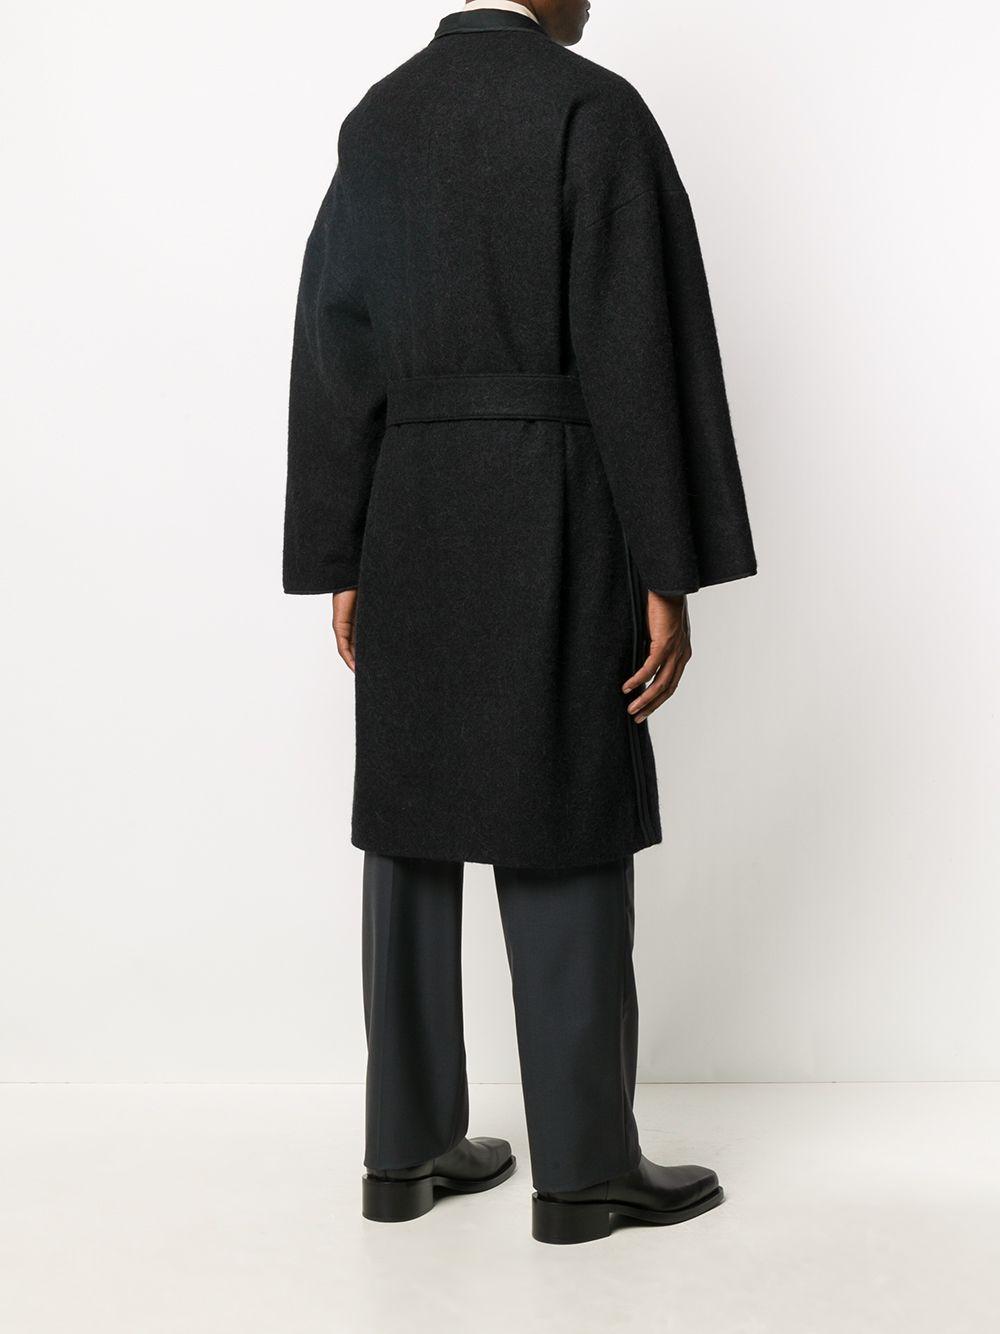 Lemaire Wool Wrap Coat in Black for Men - Lyst